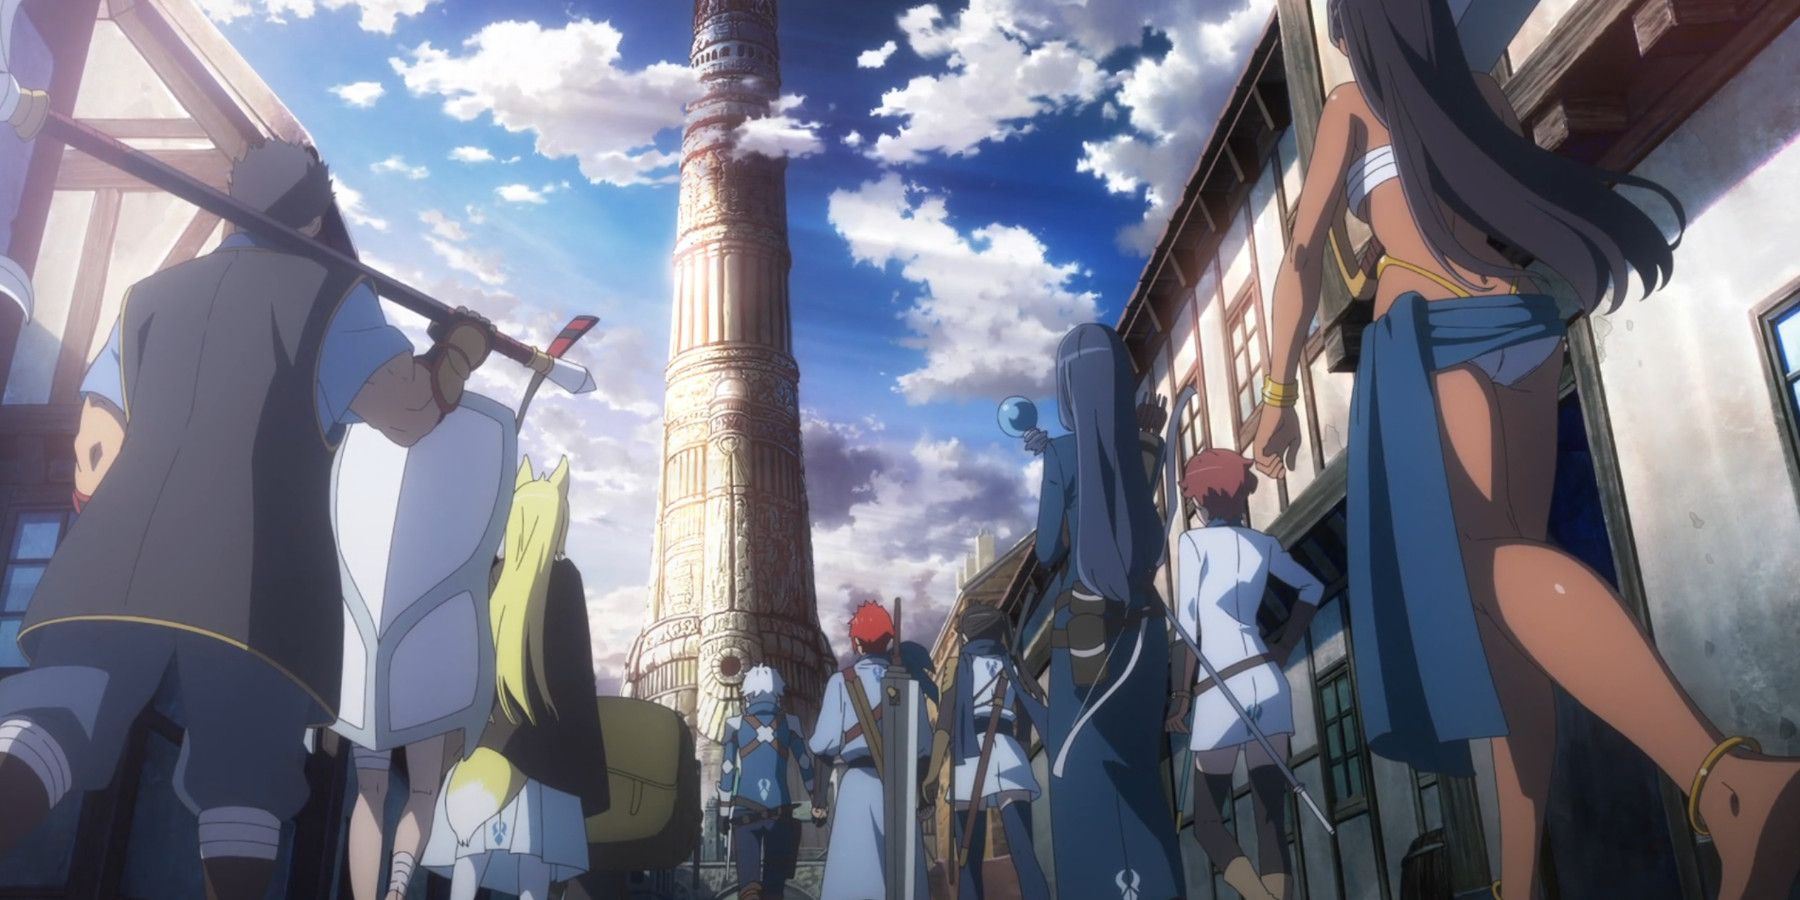 DanMachi season 4 episode 1: Where to watch, release date and time